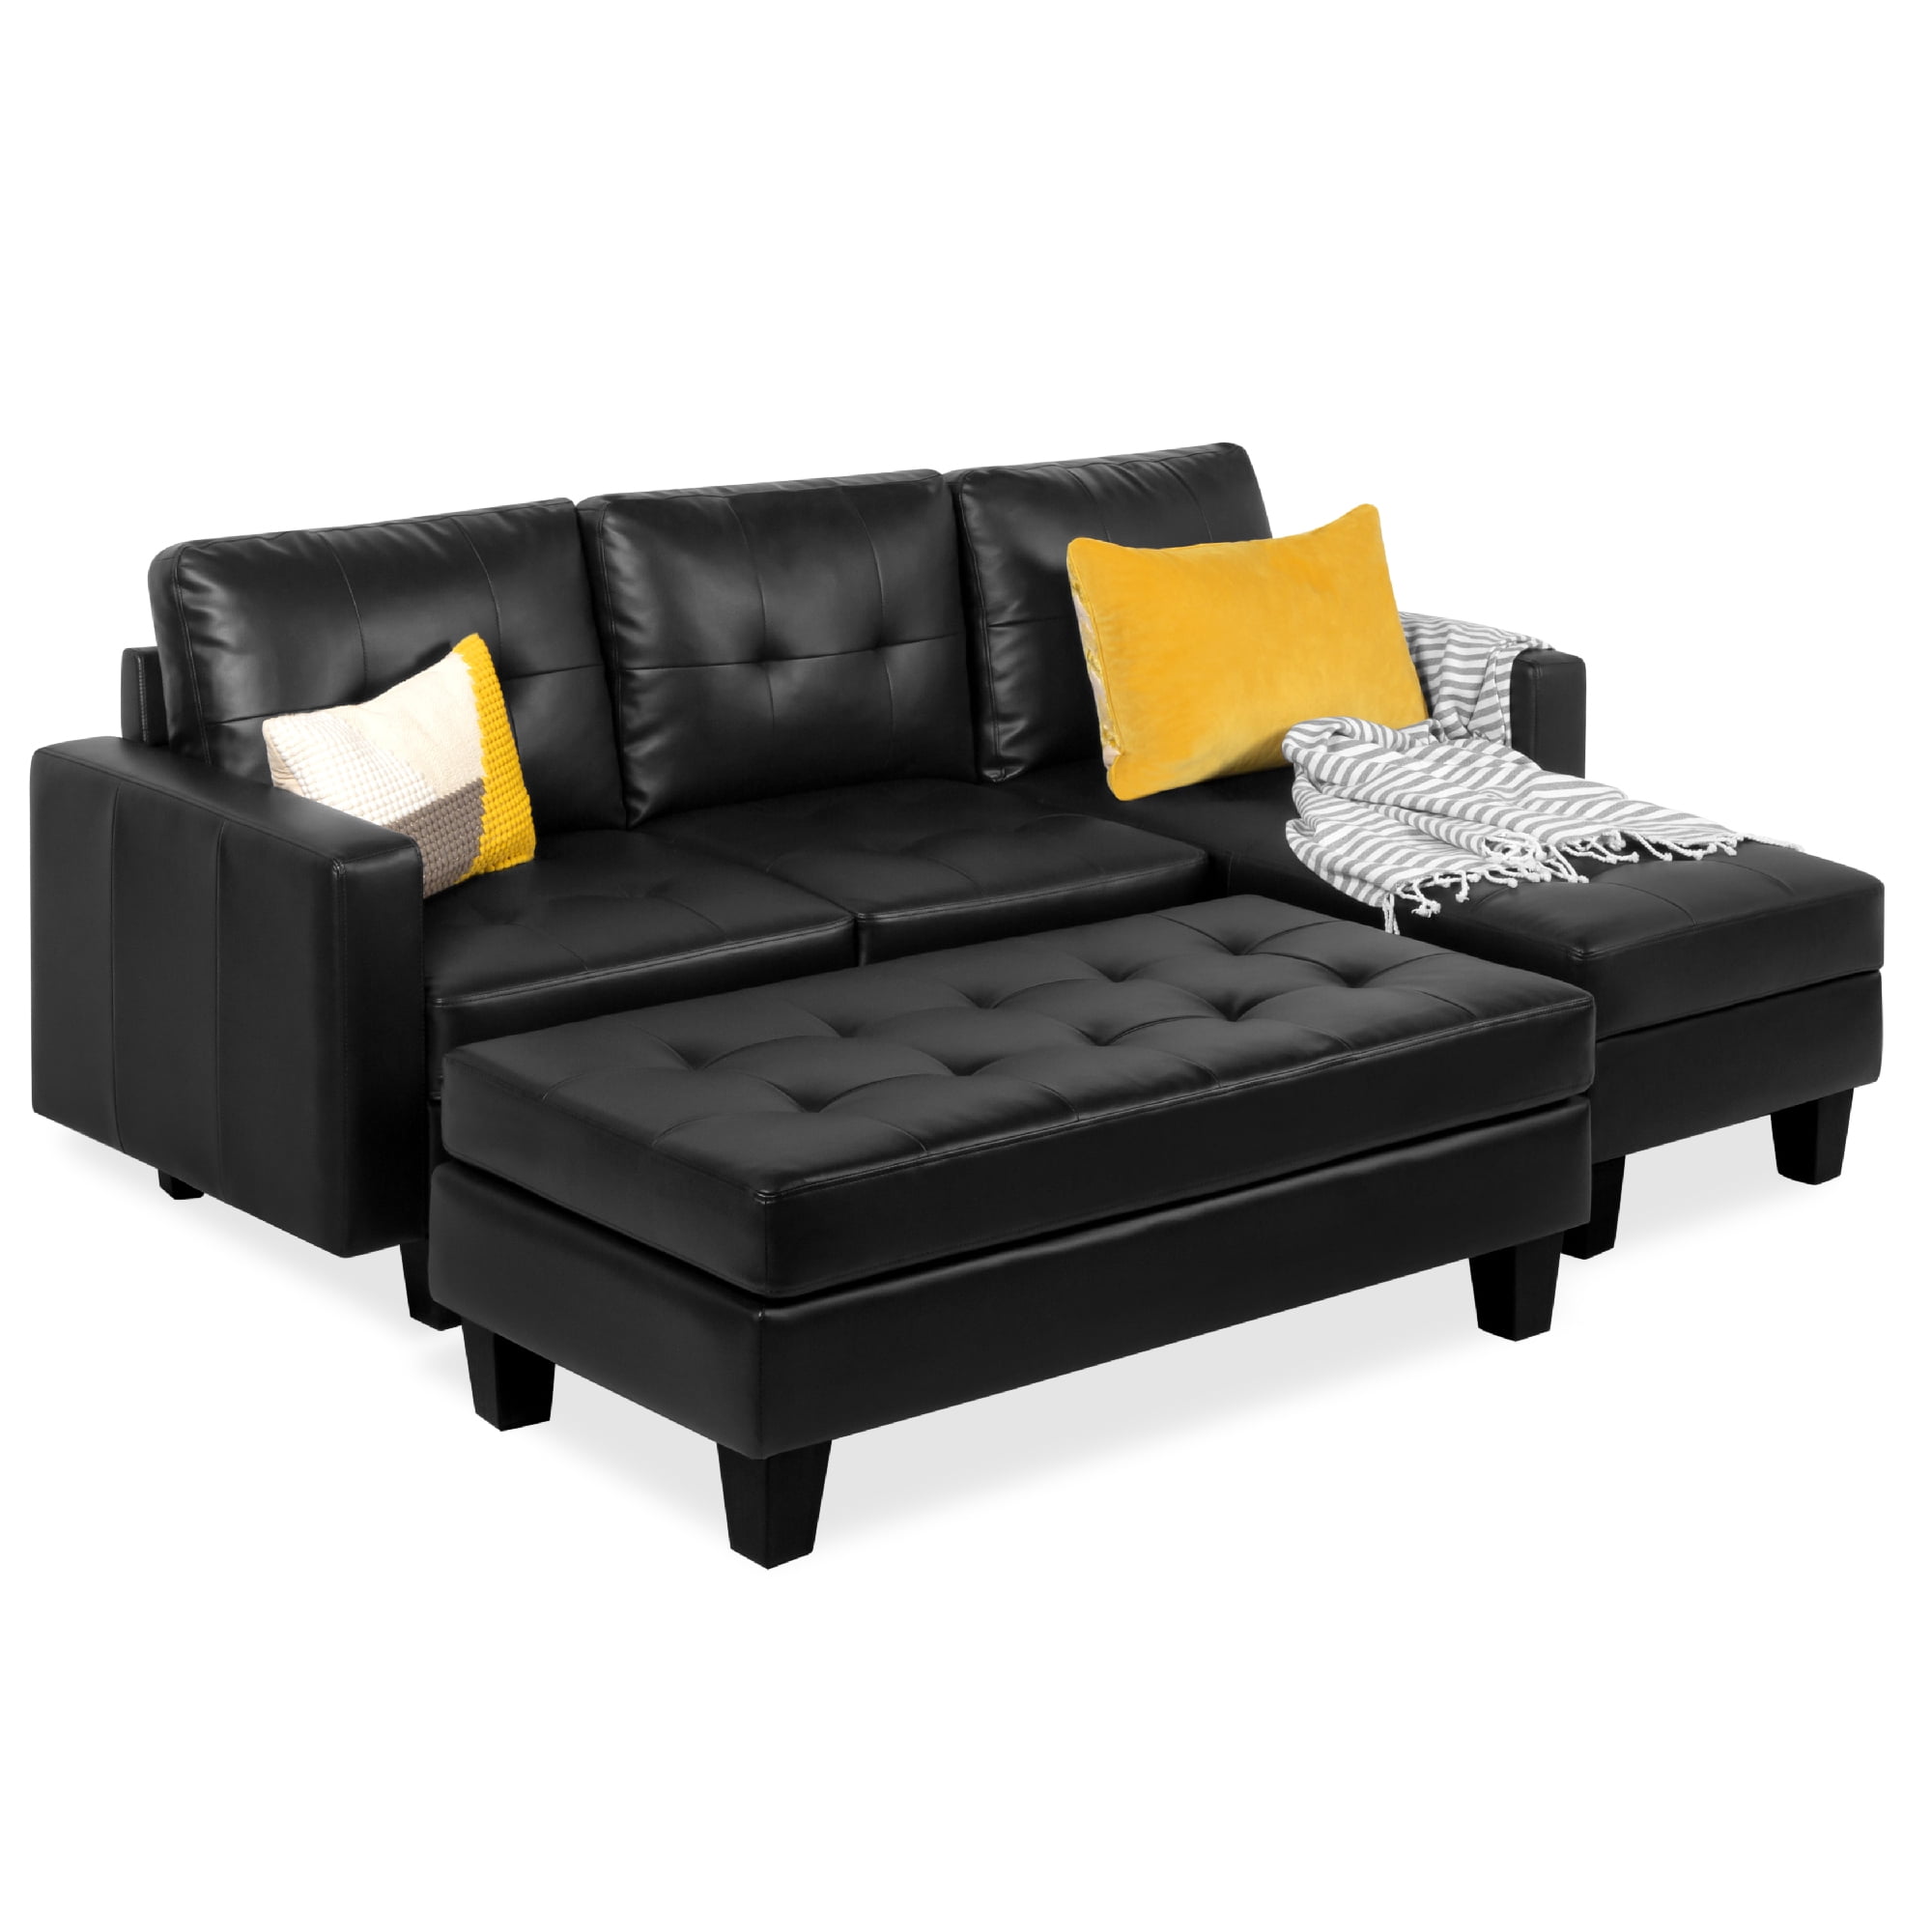 Chaise Lounge Ottoman Bench Black, Sleeper Sofa Sectional Faux Leather